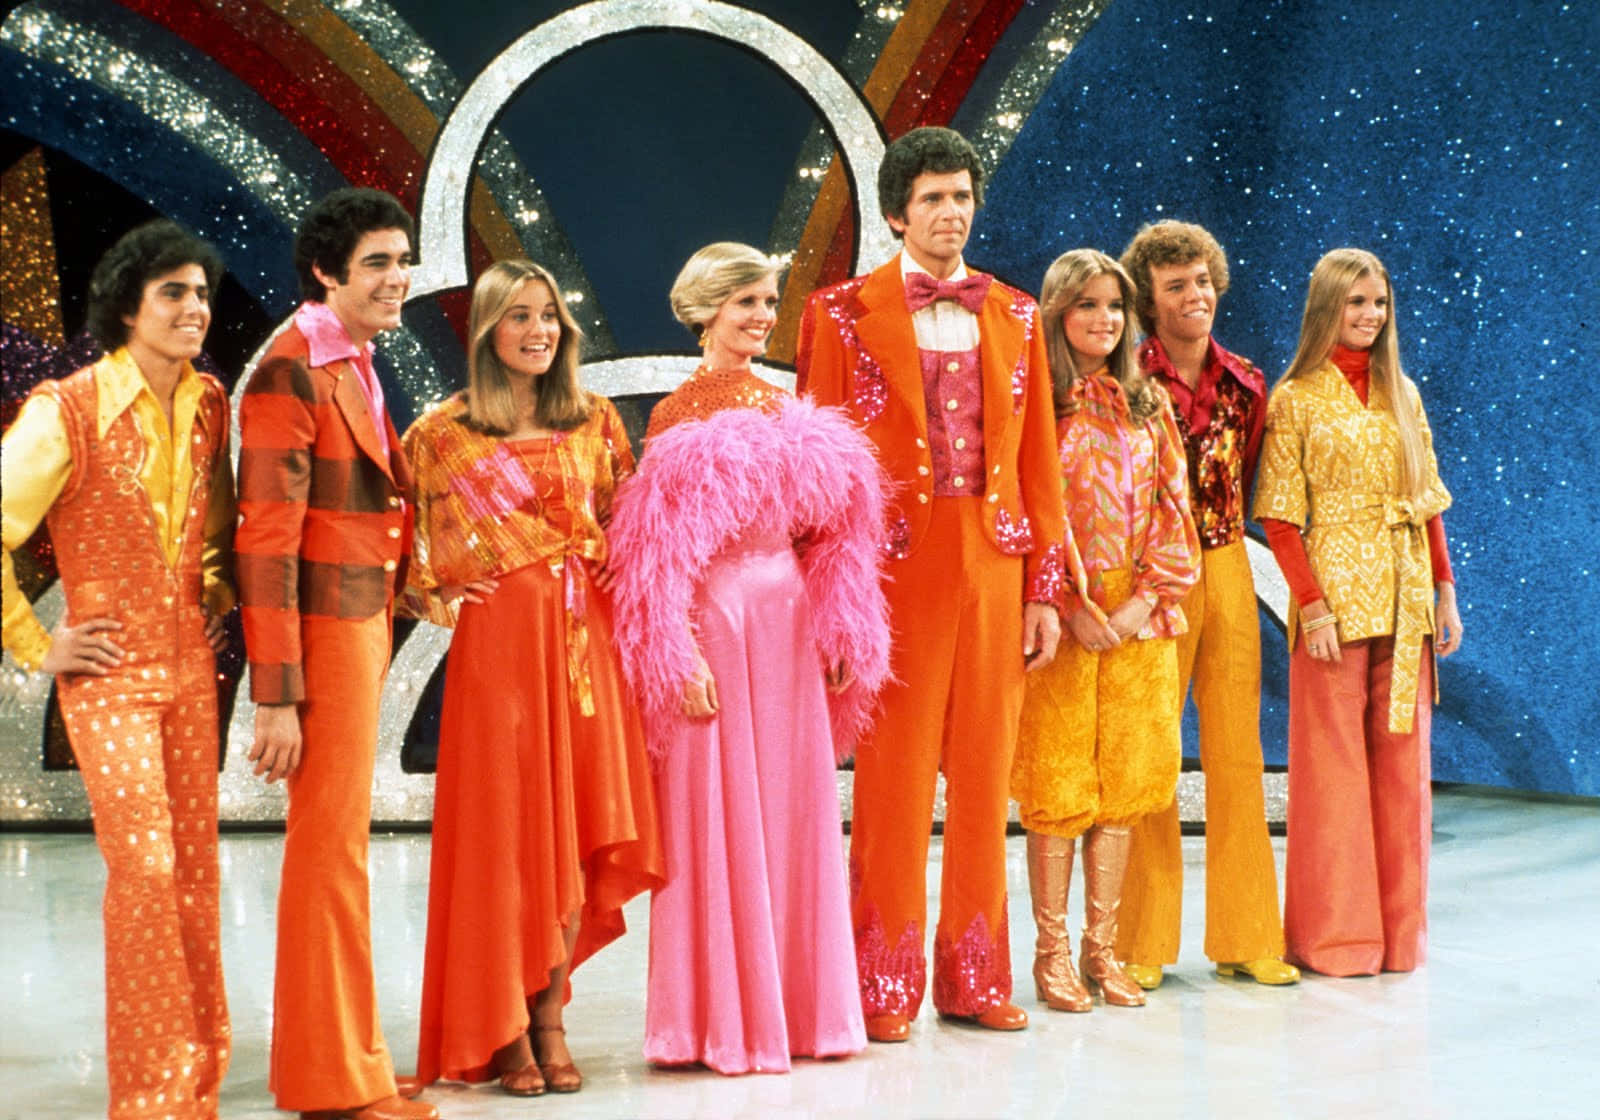 A Group Of People In Orange Costumes Standing On Stage